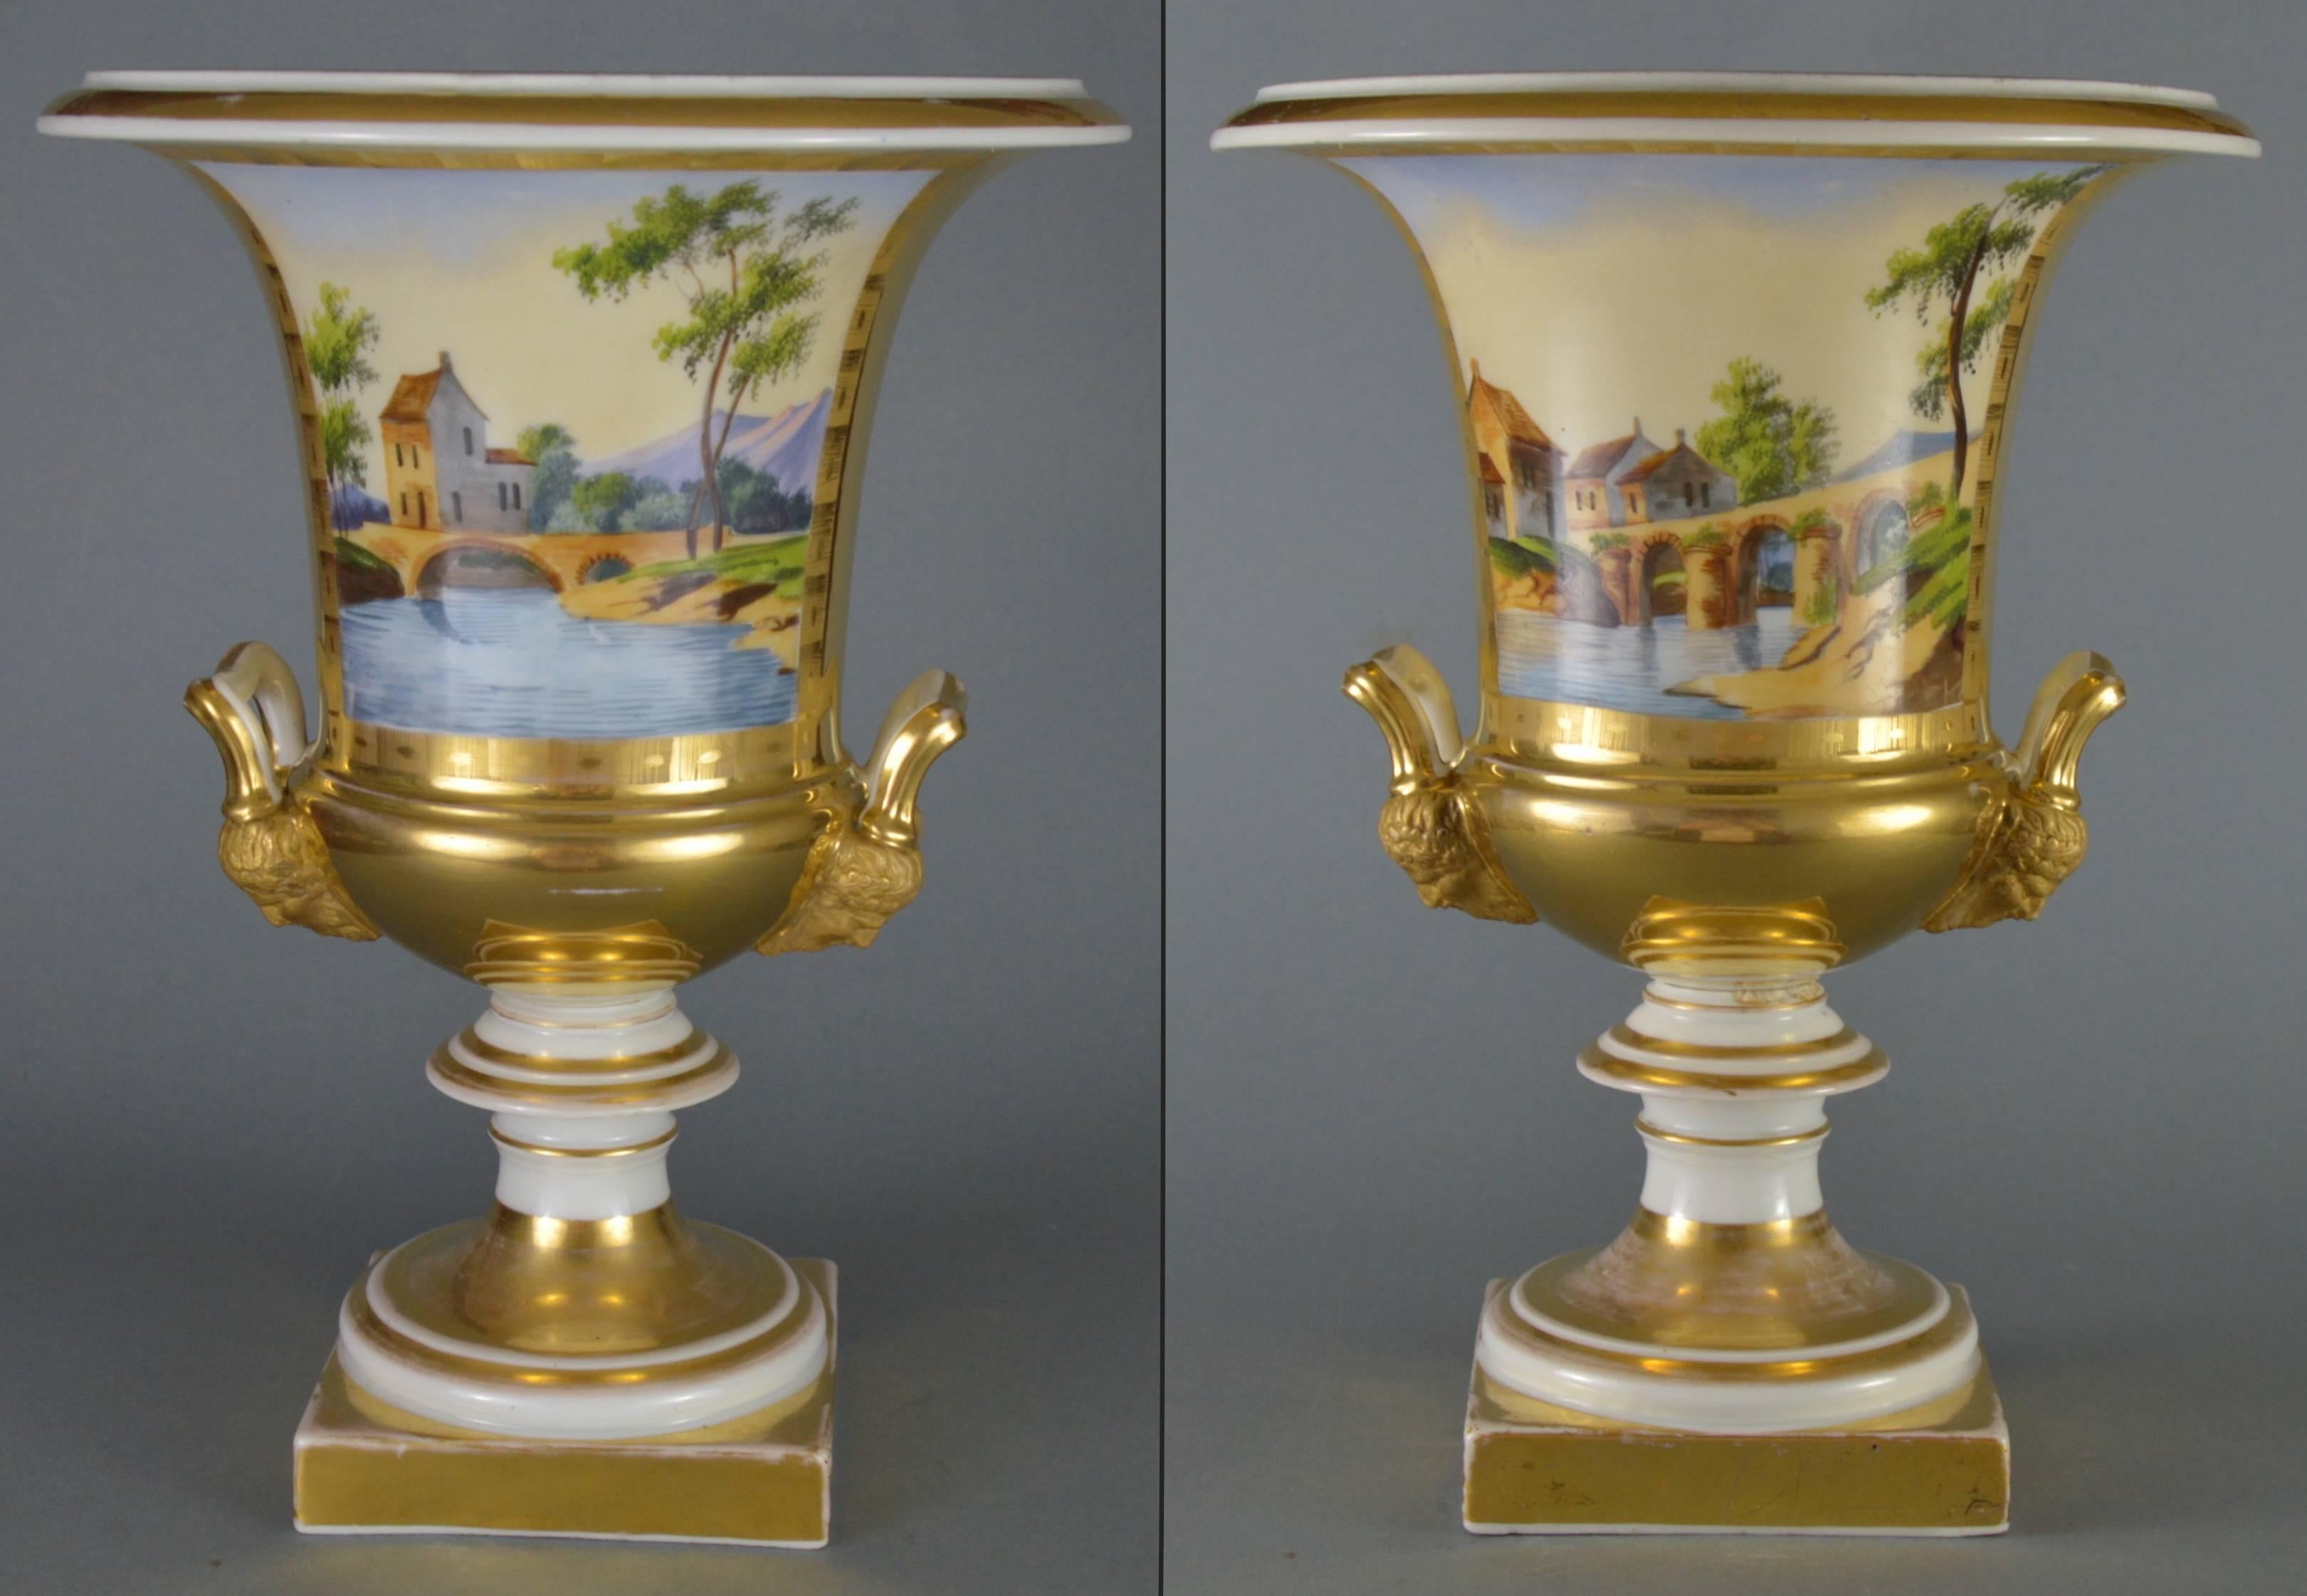 Charles X Pair of French Empire Porcelain Medici Vases Urns Old, Paris